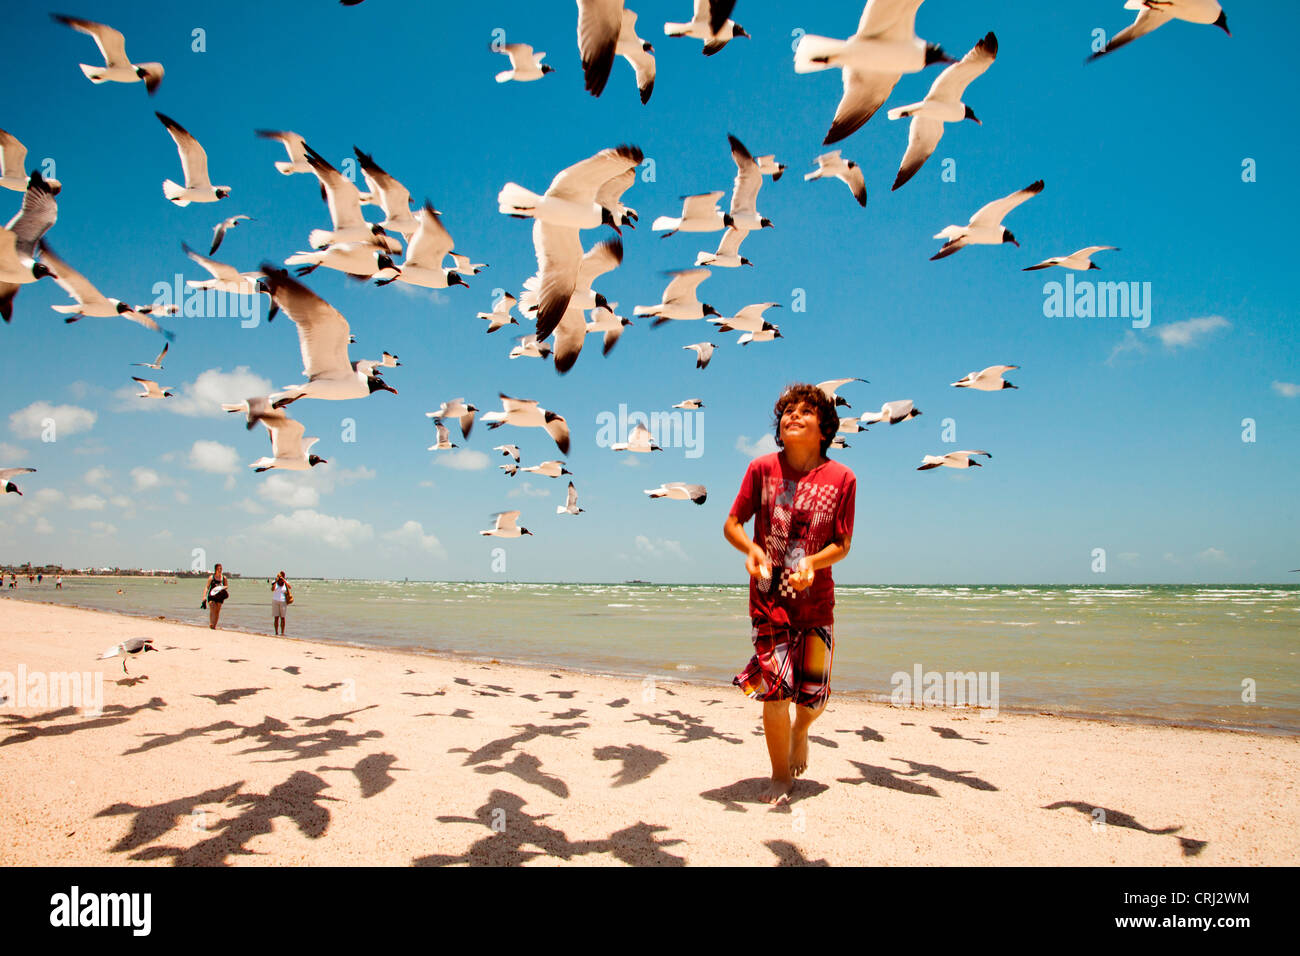 A young boy tosses bread into the air for a flock of seagulls on a beach. Stock Photo